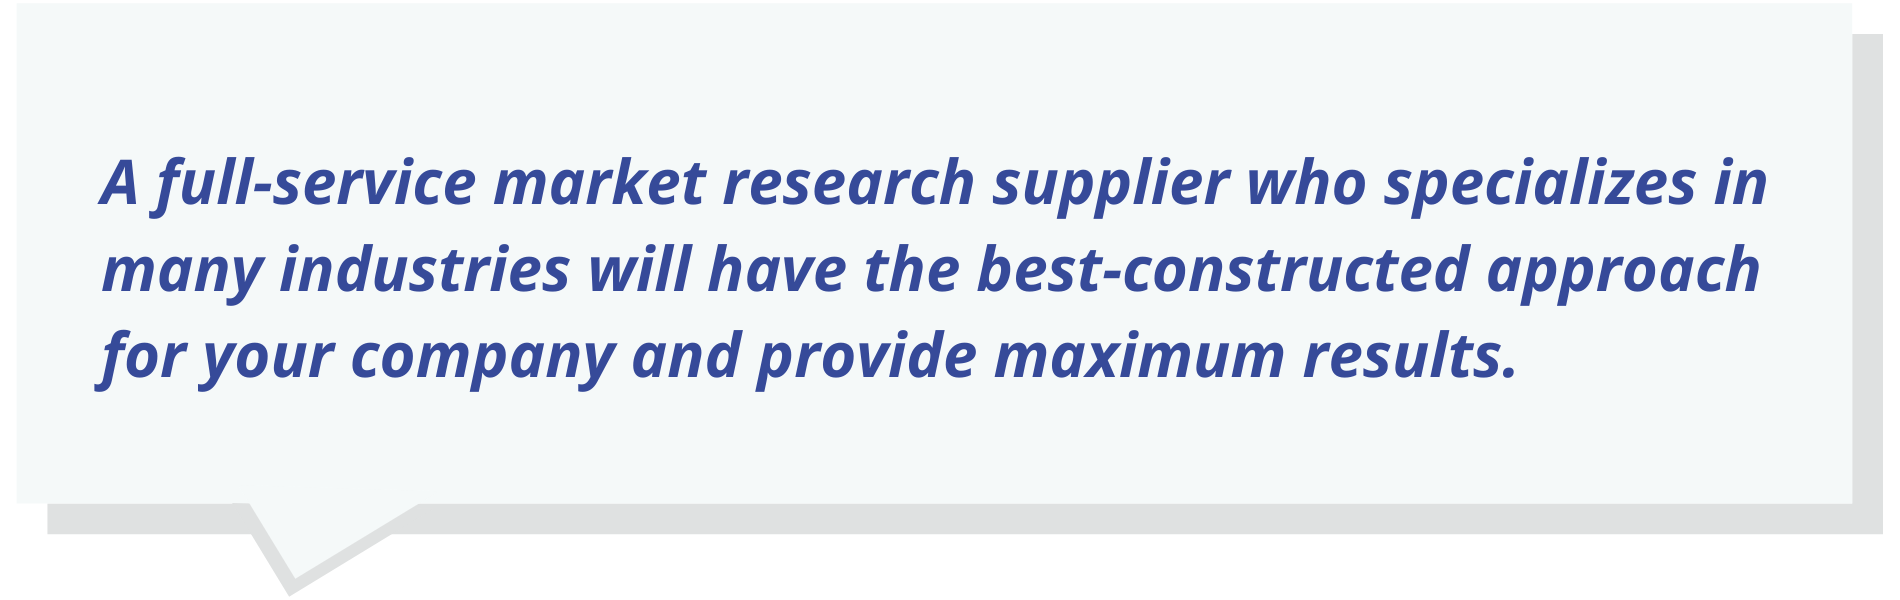 A full-service market research supplier who specializes in many industries will have the best-constructed approach for your company and provide maximum results.